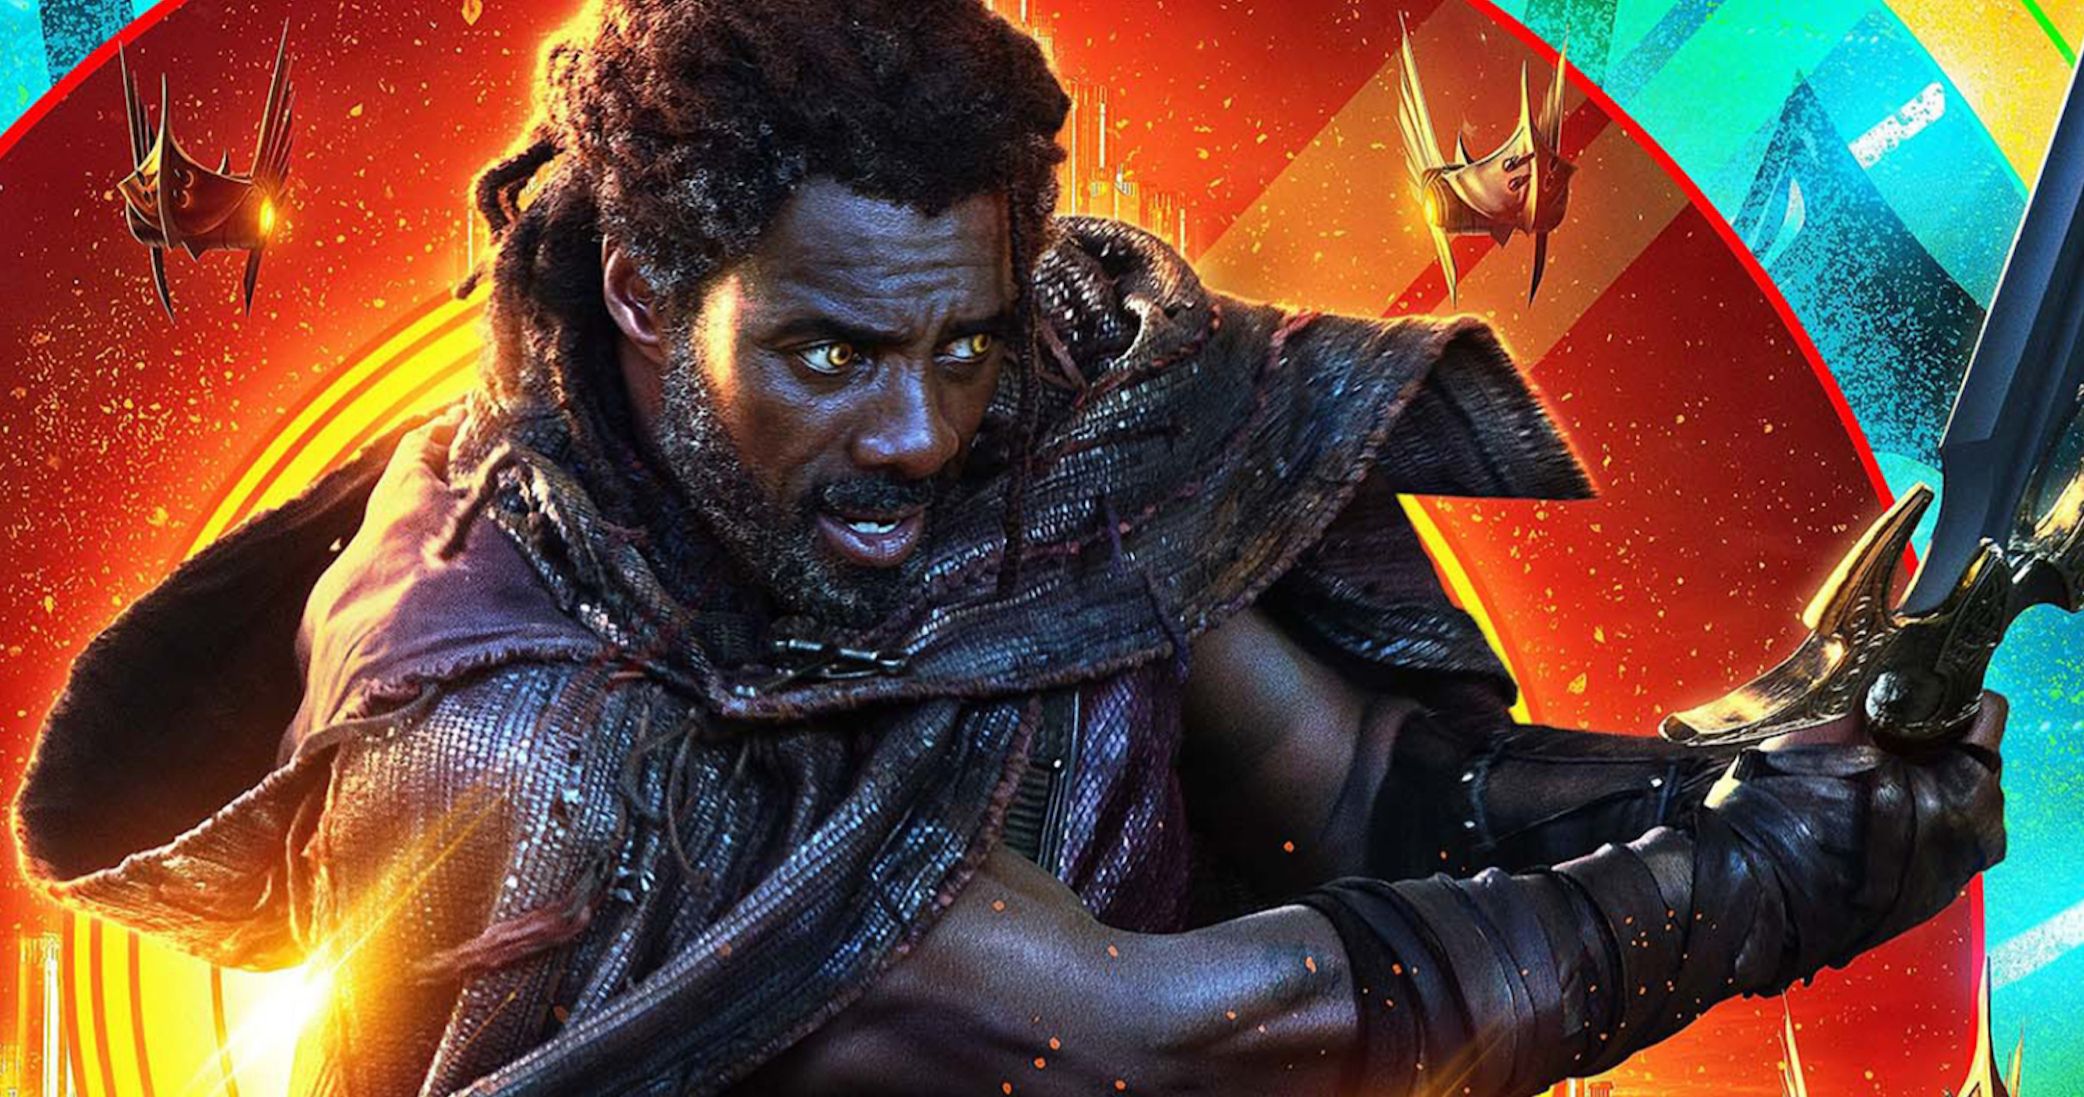 Idris Elba 'Seemingly' Teases the Return of Heimdall in Thor: Love and Thunder